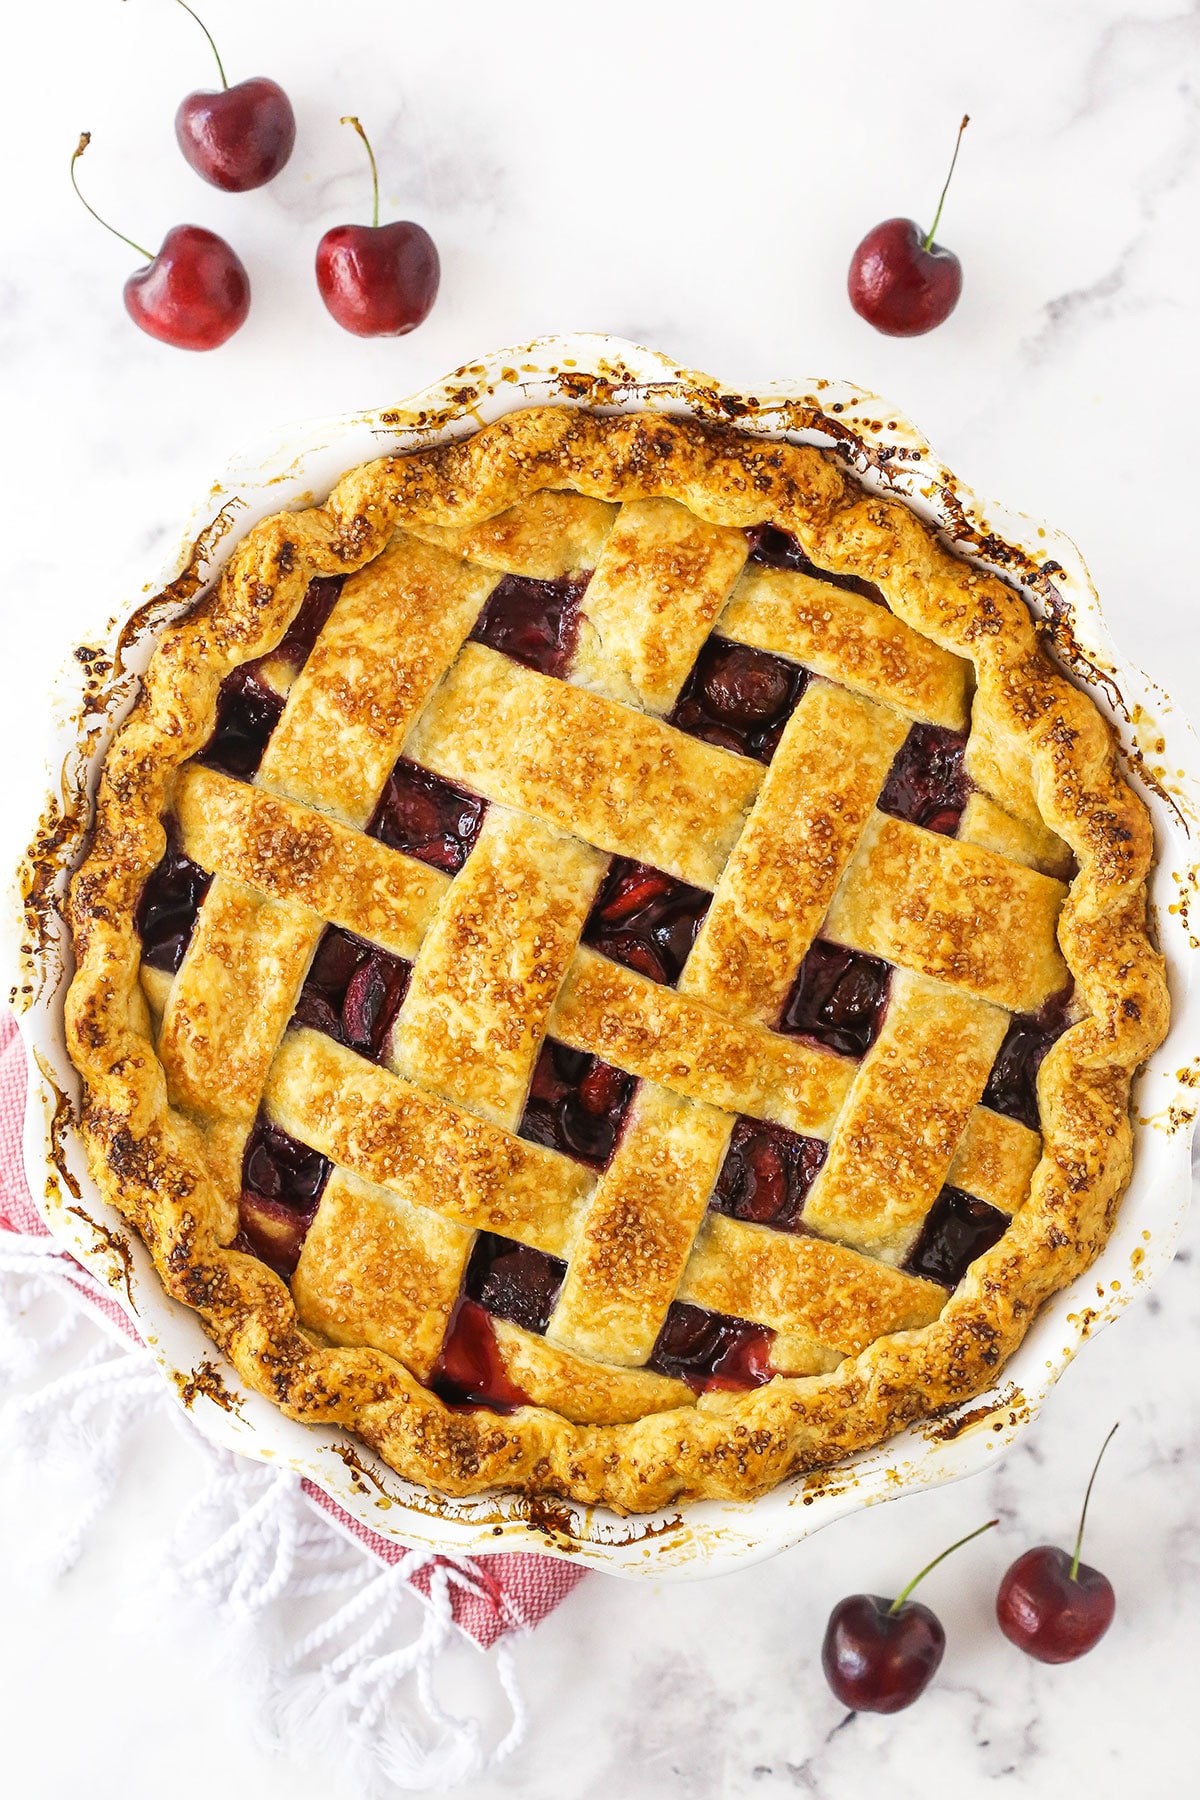 A homemade cherry pie on a marble countertop with six fresh cherries surrounding it